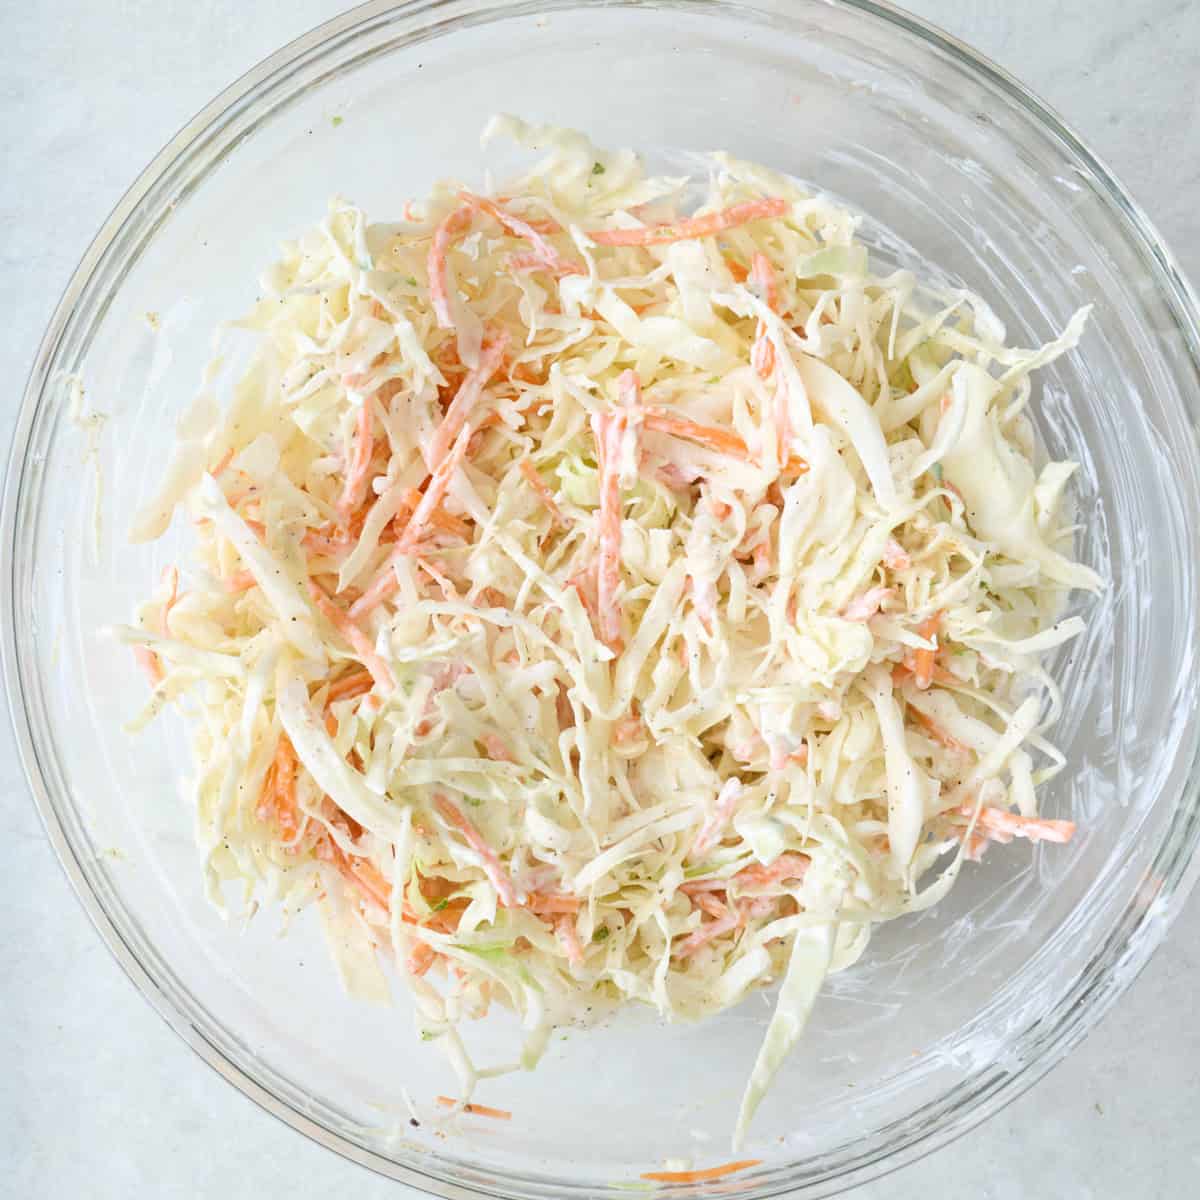 Coleslaw in a large glass bowl.